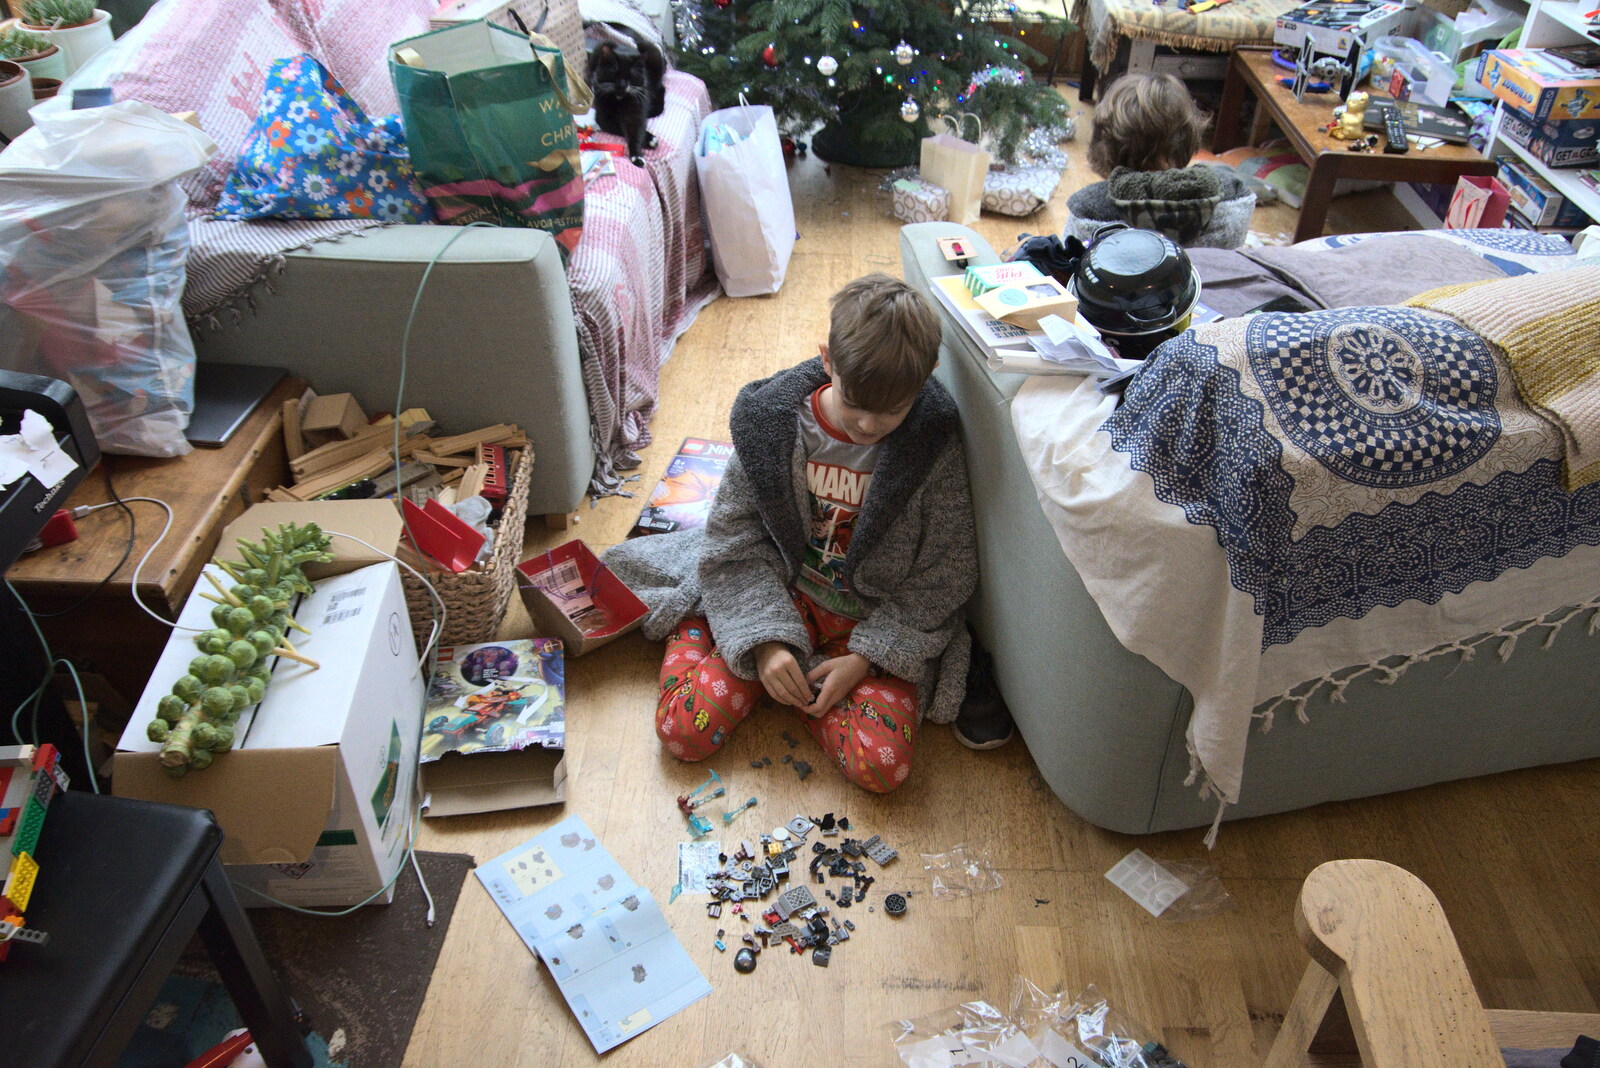 Harry starts on some Lego from Christmas Day at Home, Brome, Suffolk - 25th December 2021